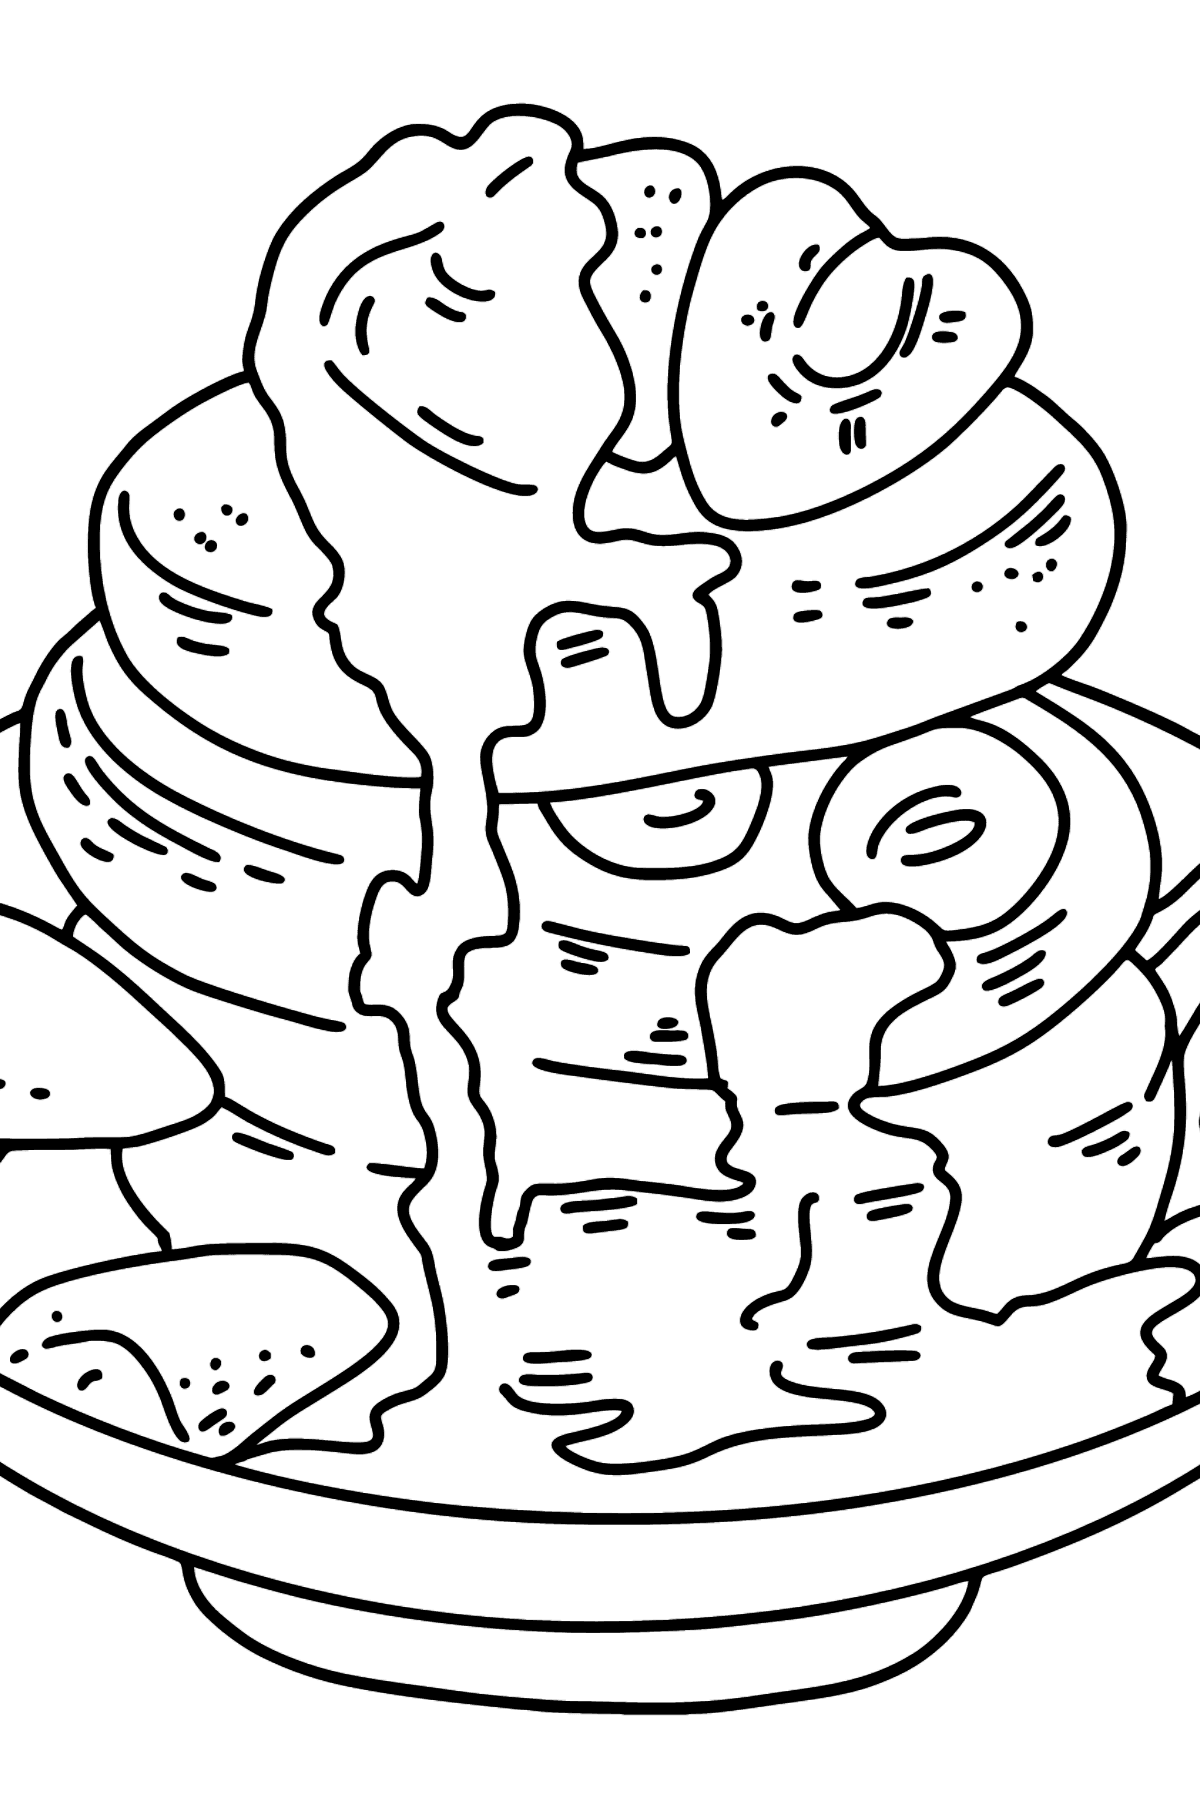 Breakfast - Pancakes with Honey coloring page - Coloring Pages for Kids